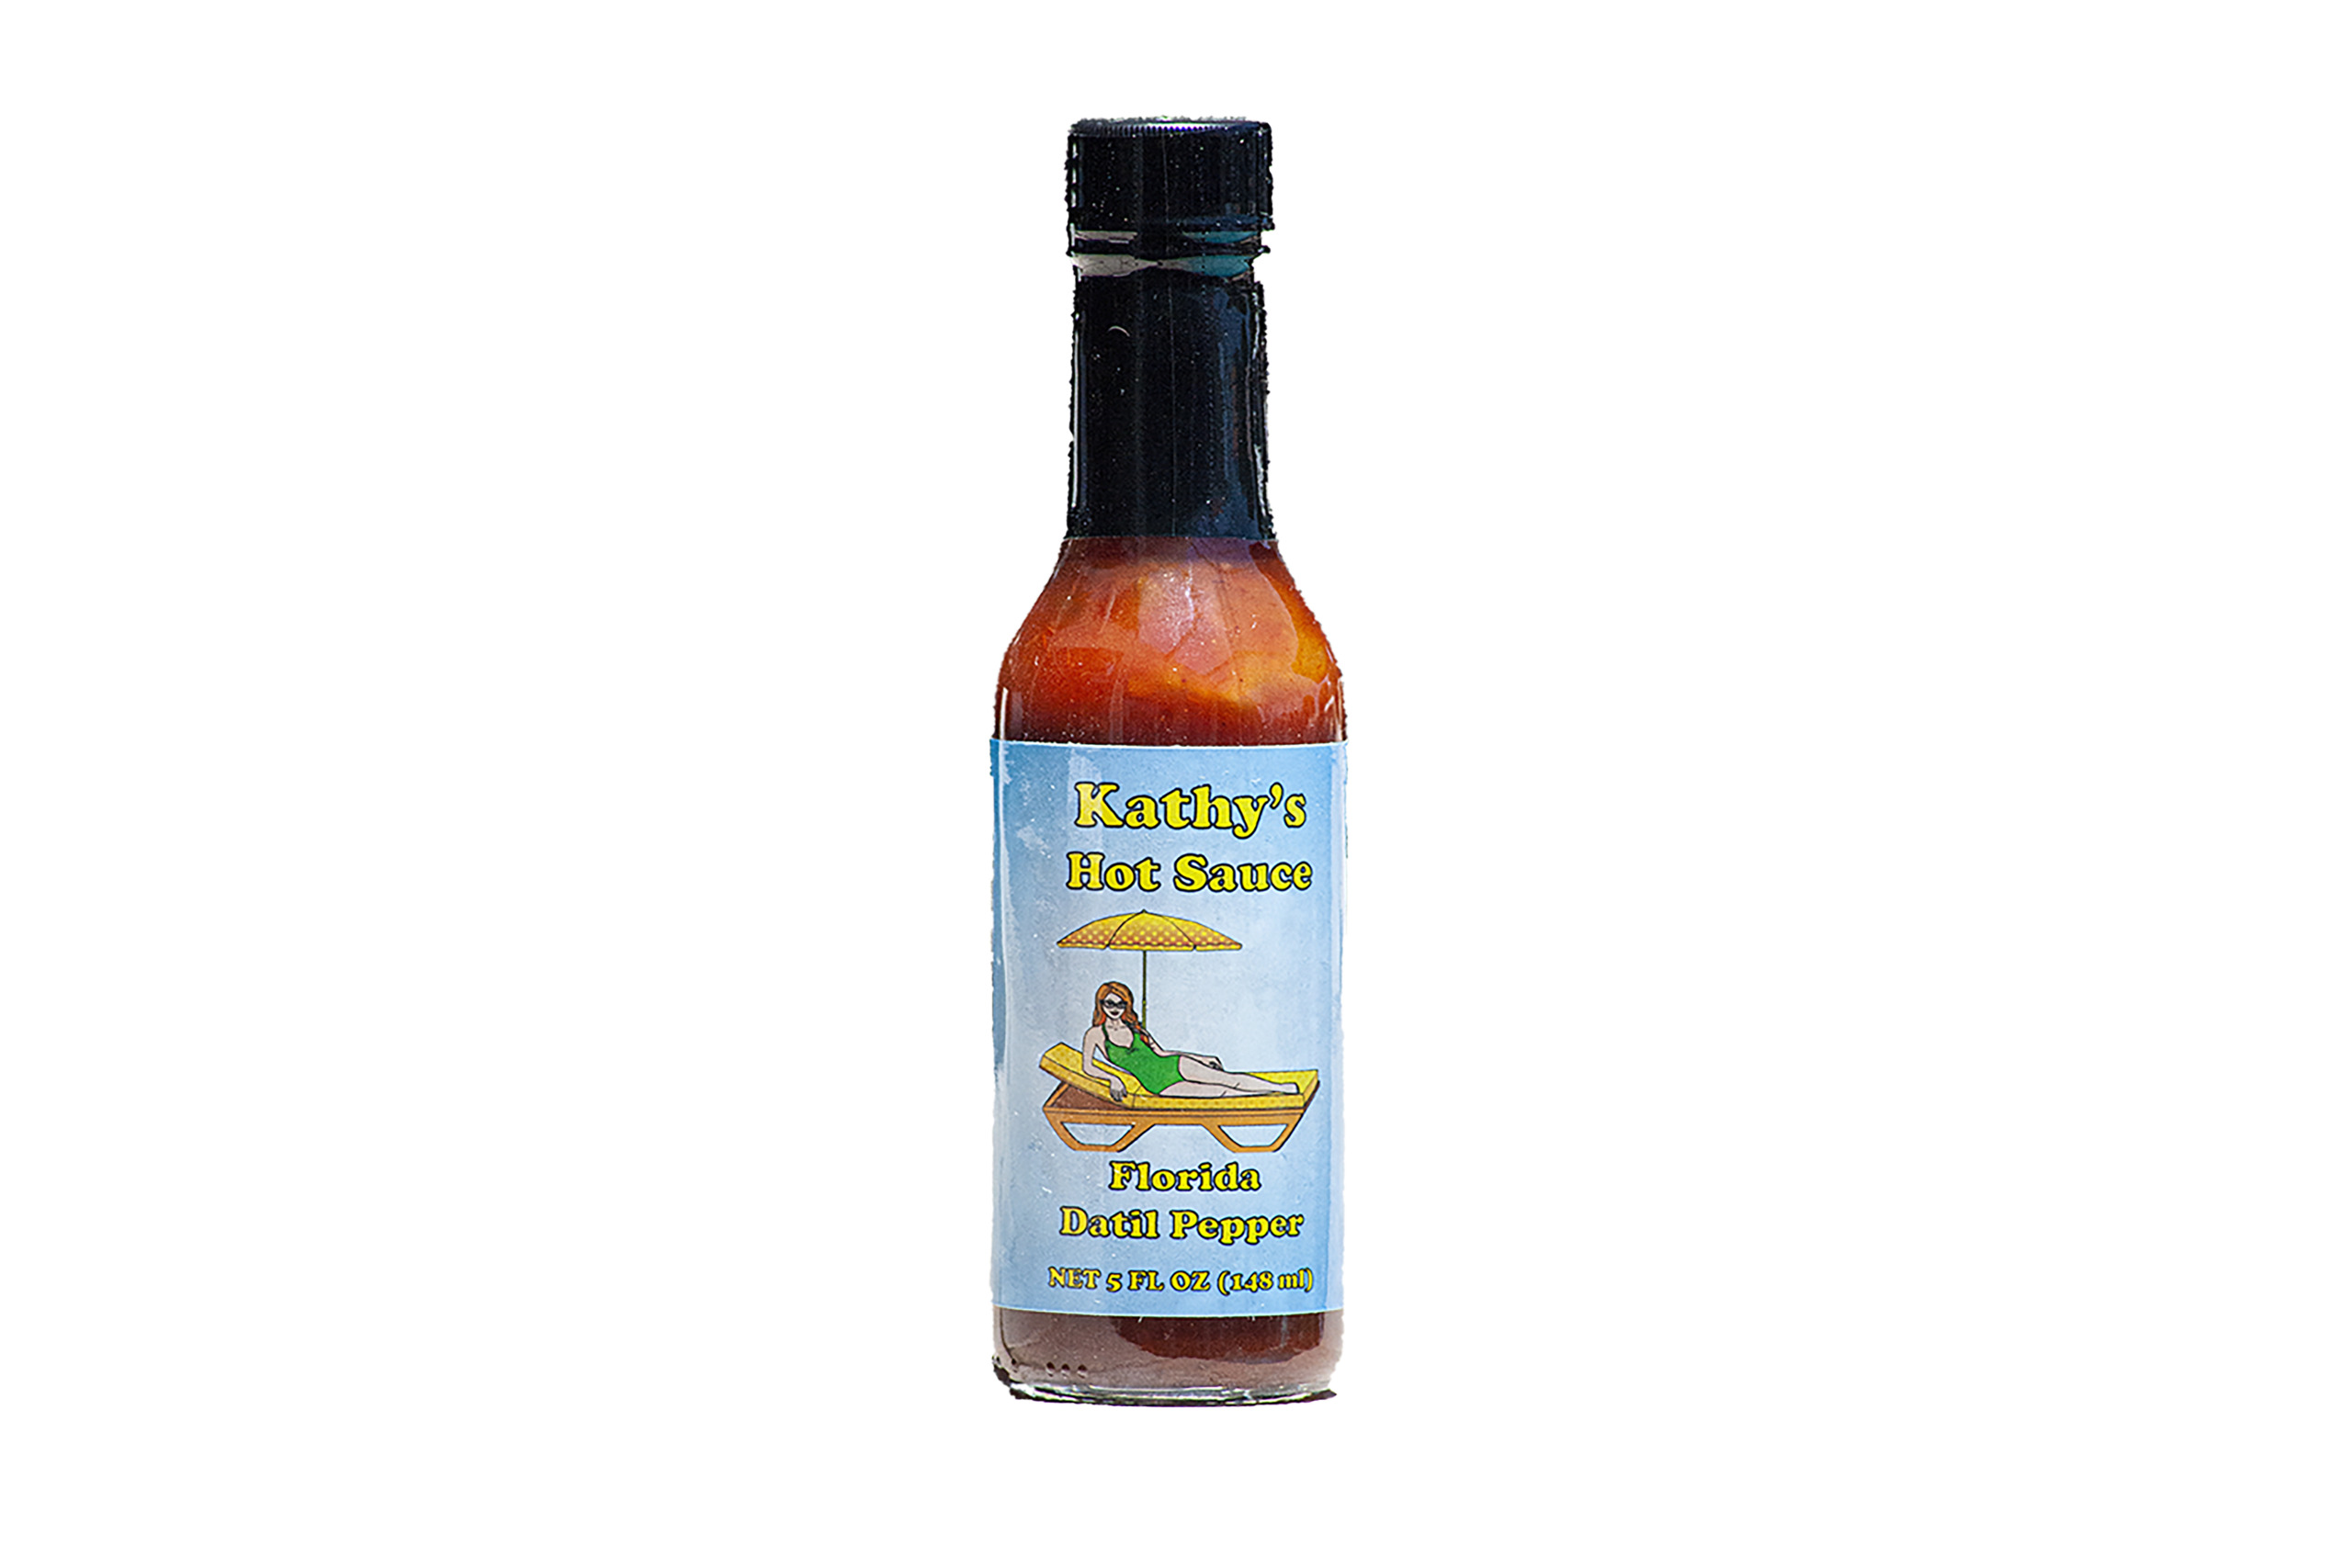 Scoville Scale - Datil Pepper Sauce and Gourmet Hot Sauces!